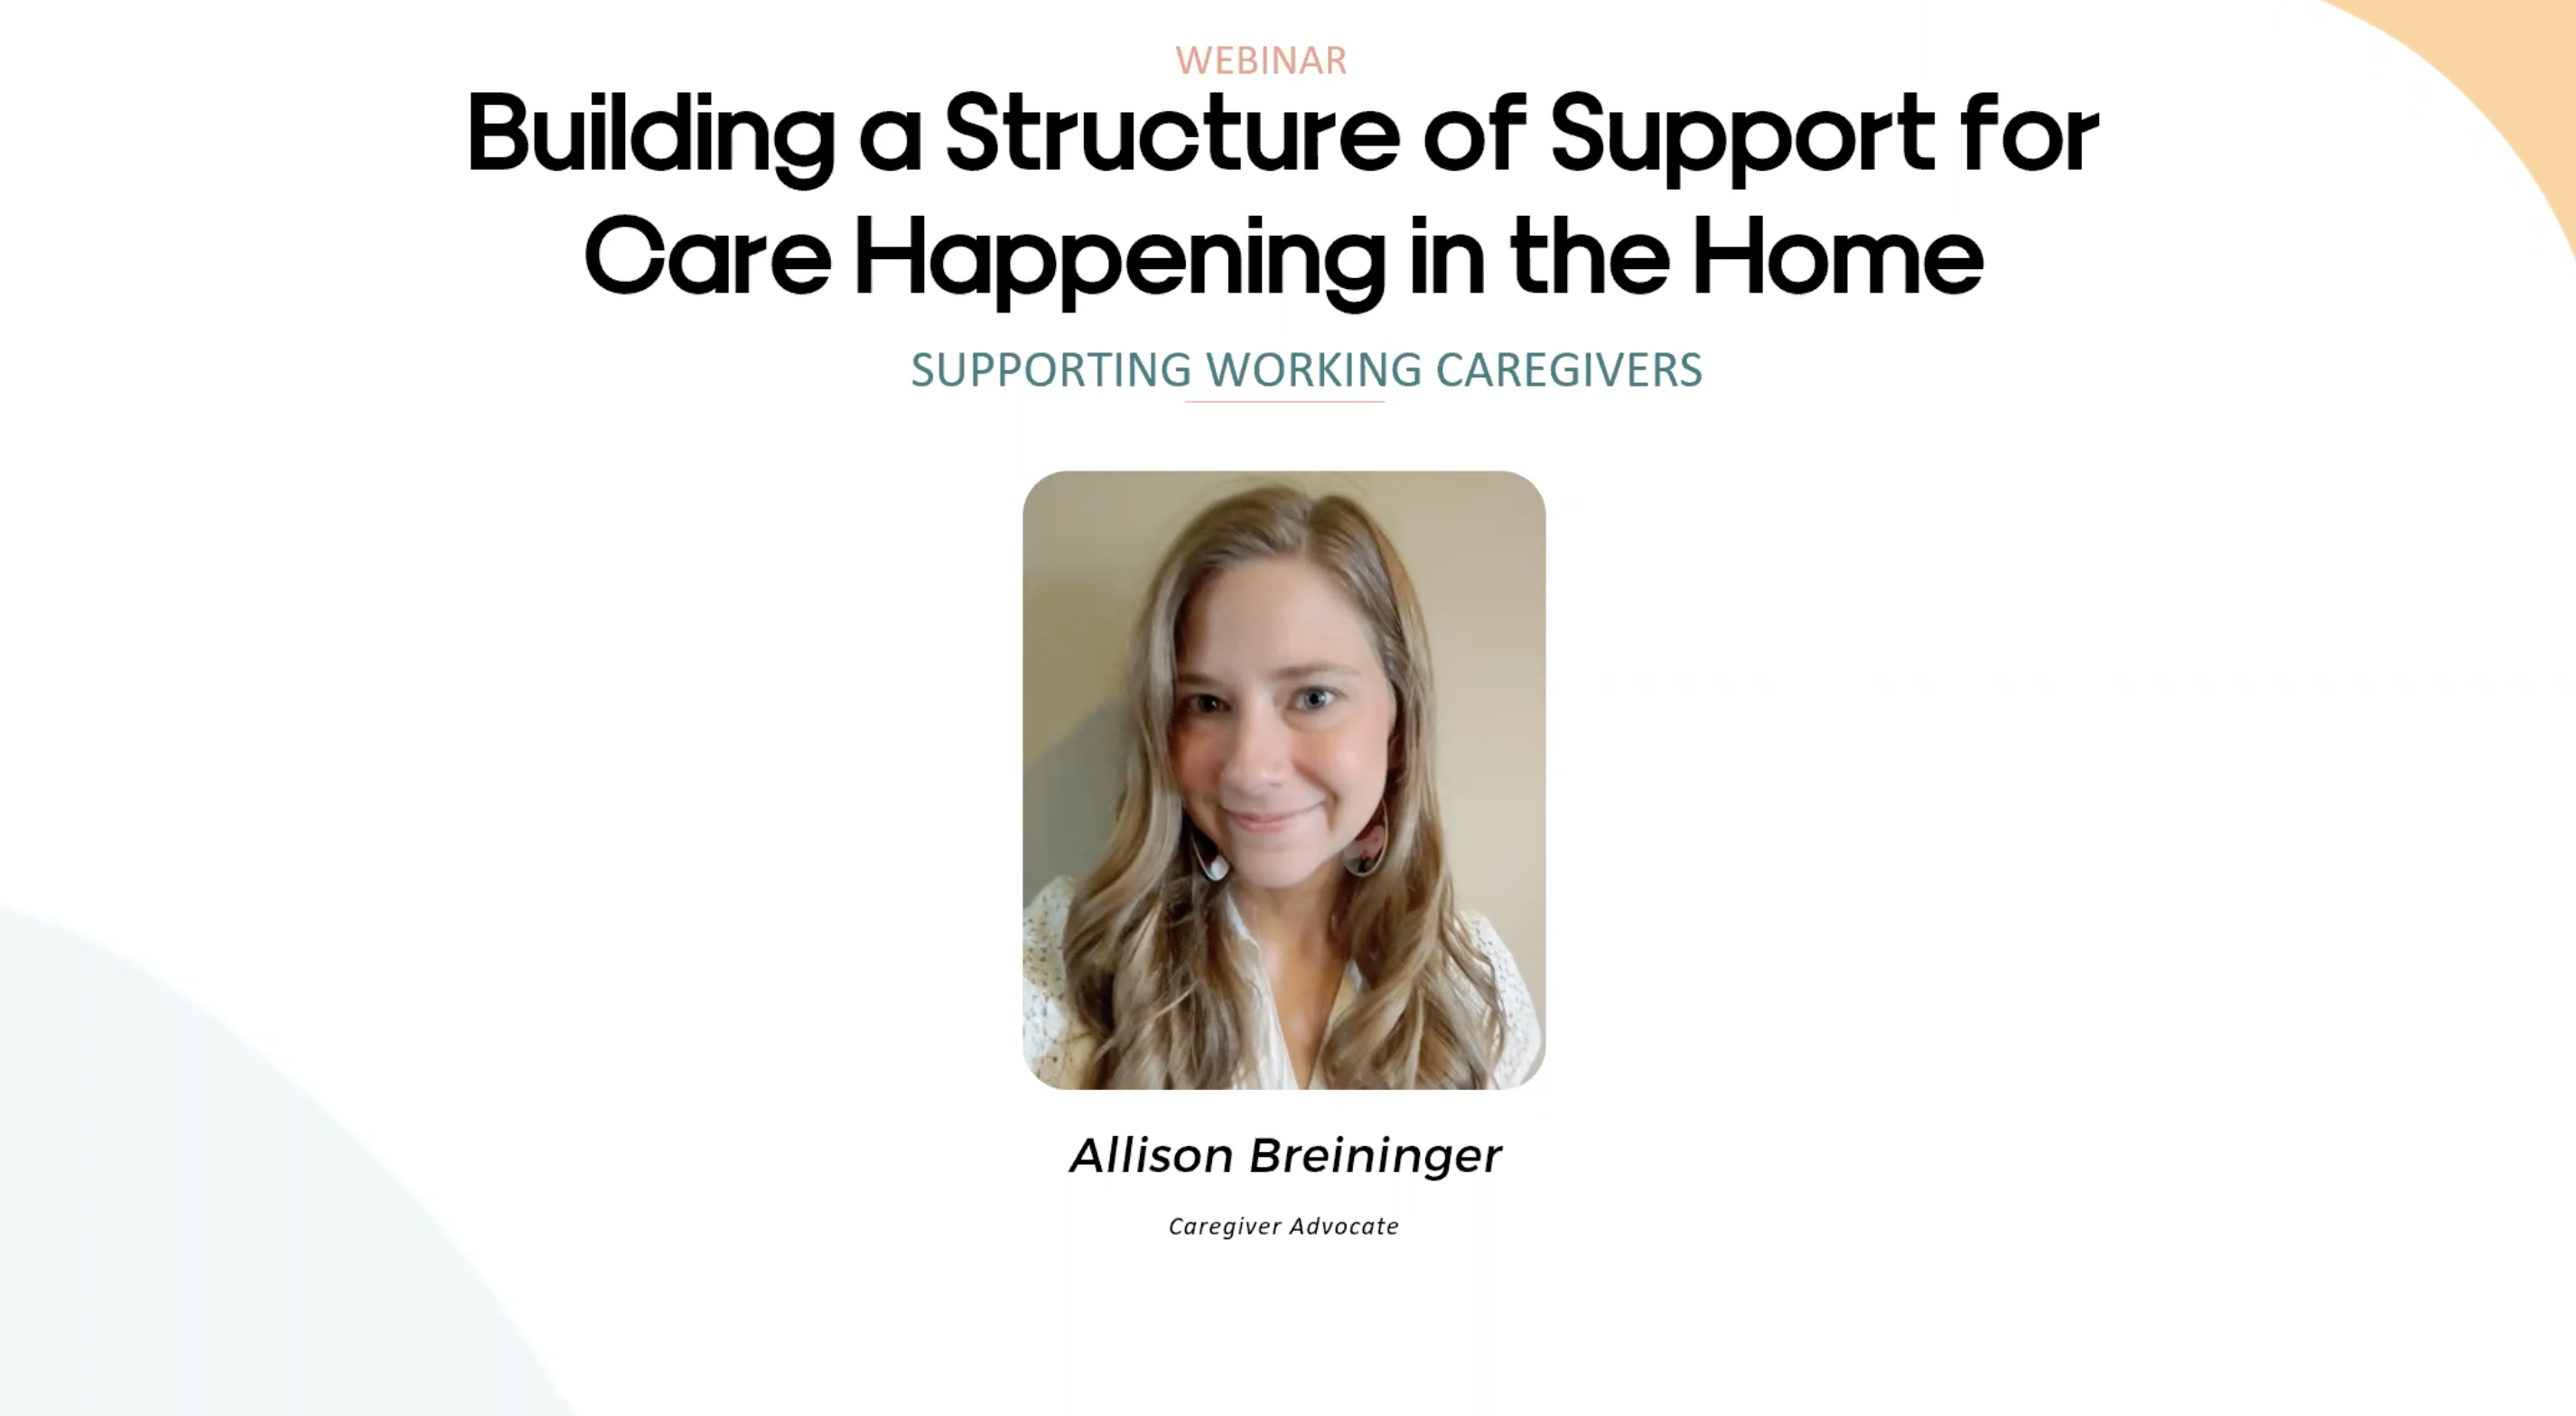 Watch: Building a Structure of Support for Care Happening in the Home